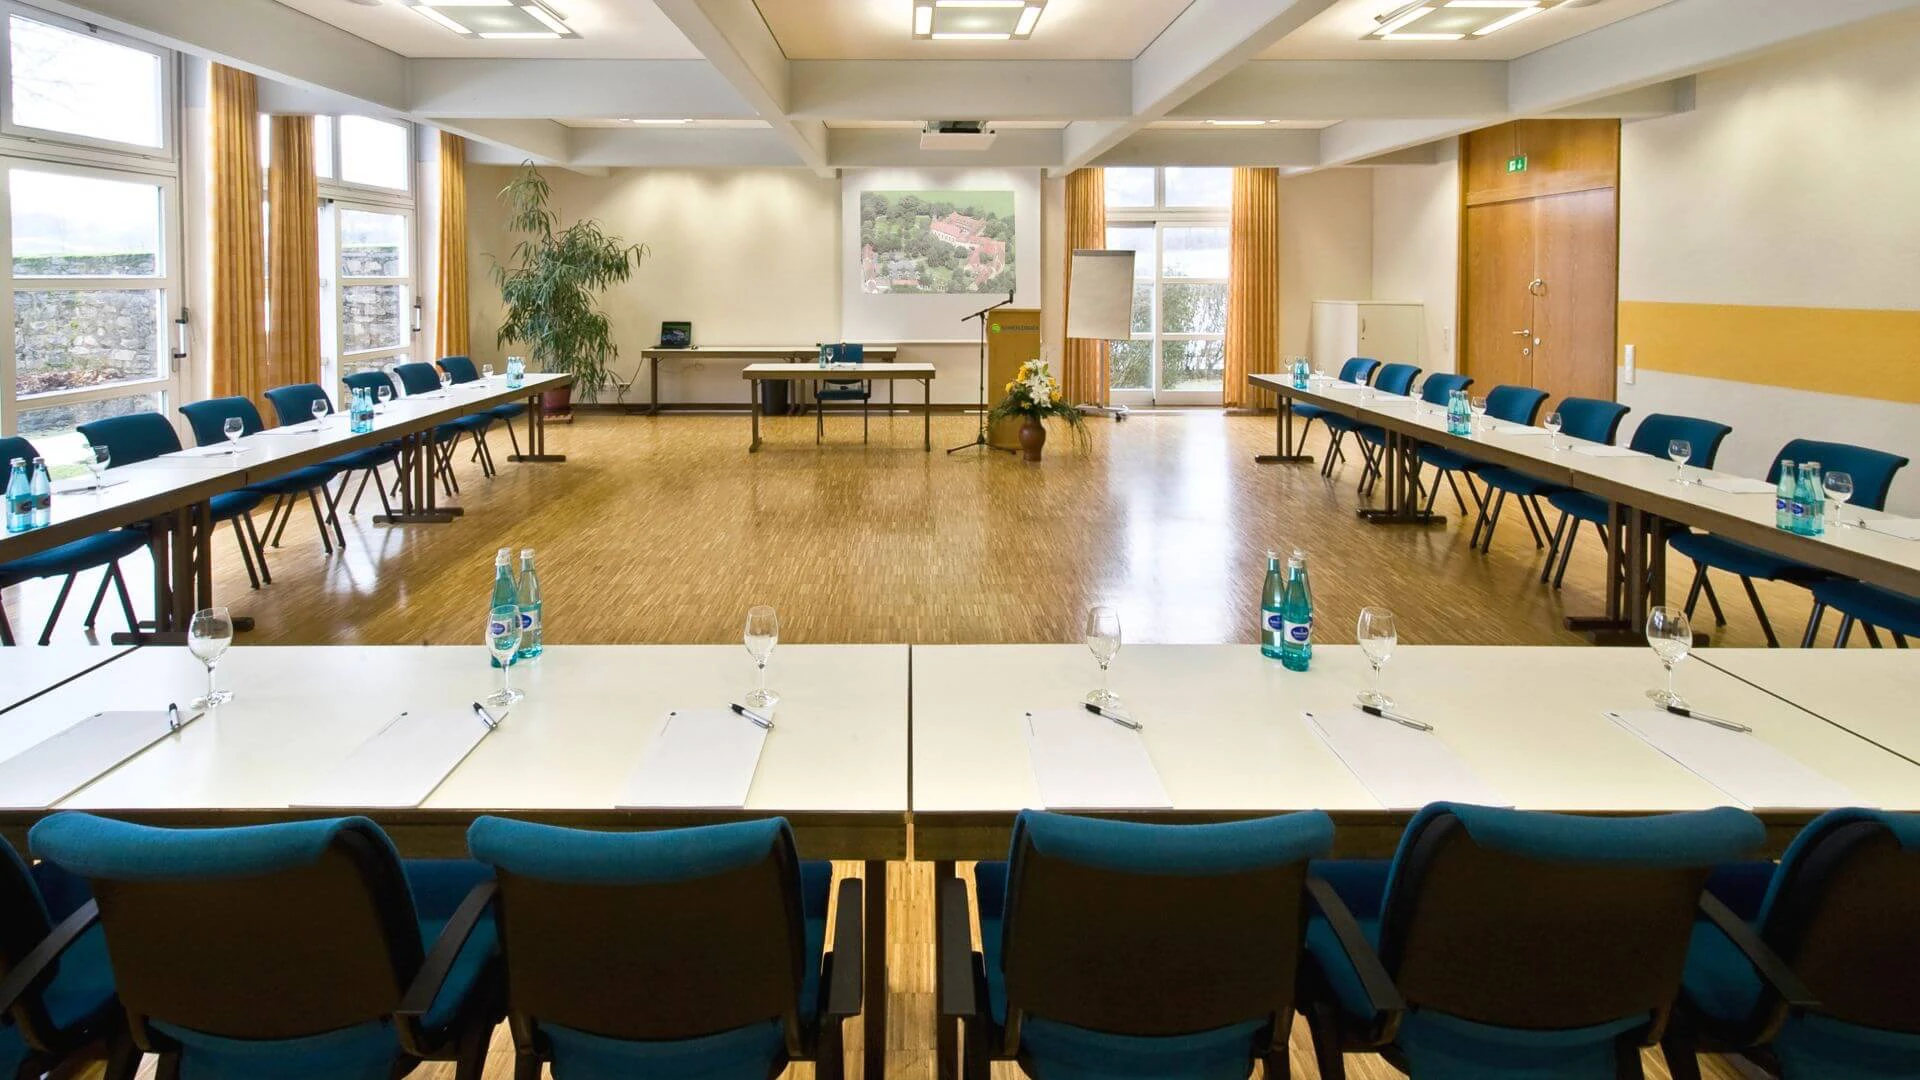 Conference Center Schmerlenbach Conference Room Seminar Room Conference